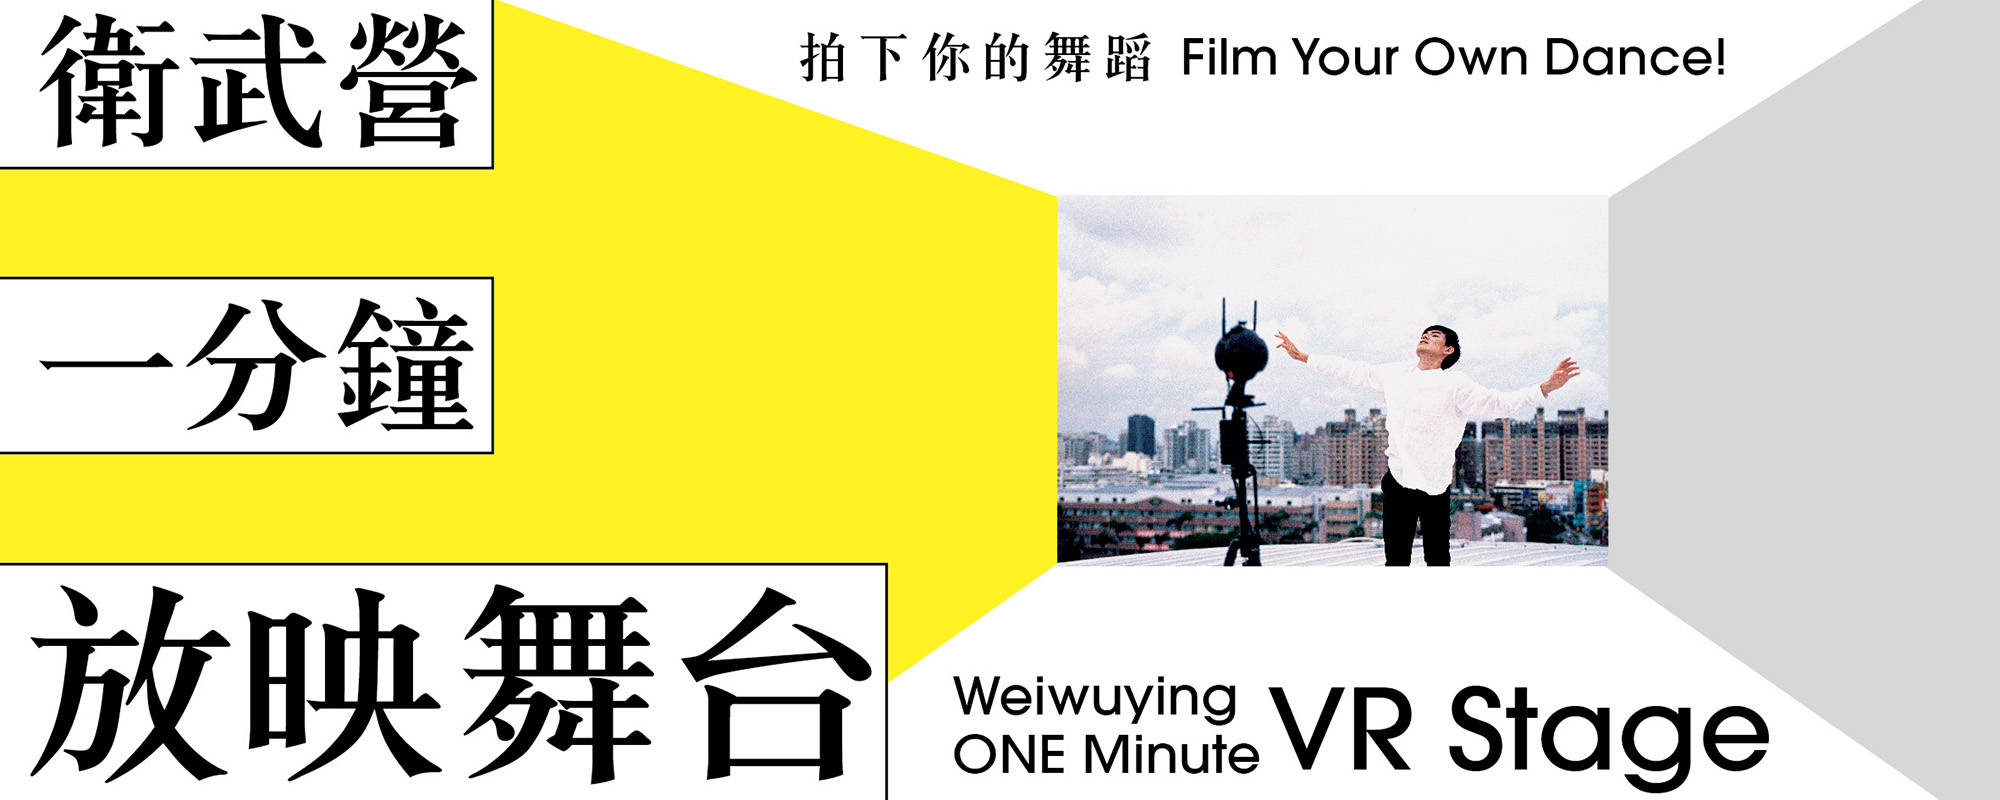 Weiwuying ONE Minute VR Stage - Film Your Own Dance